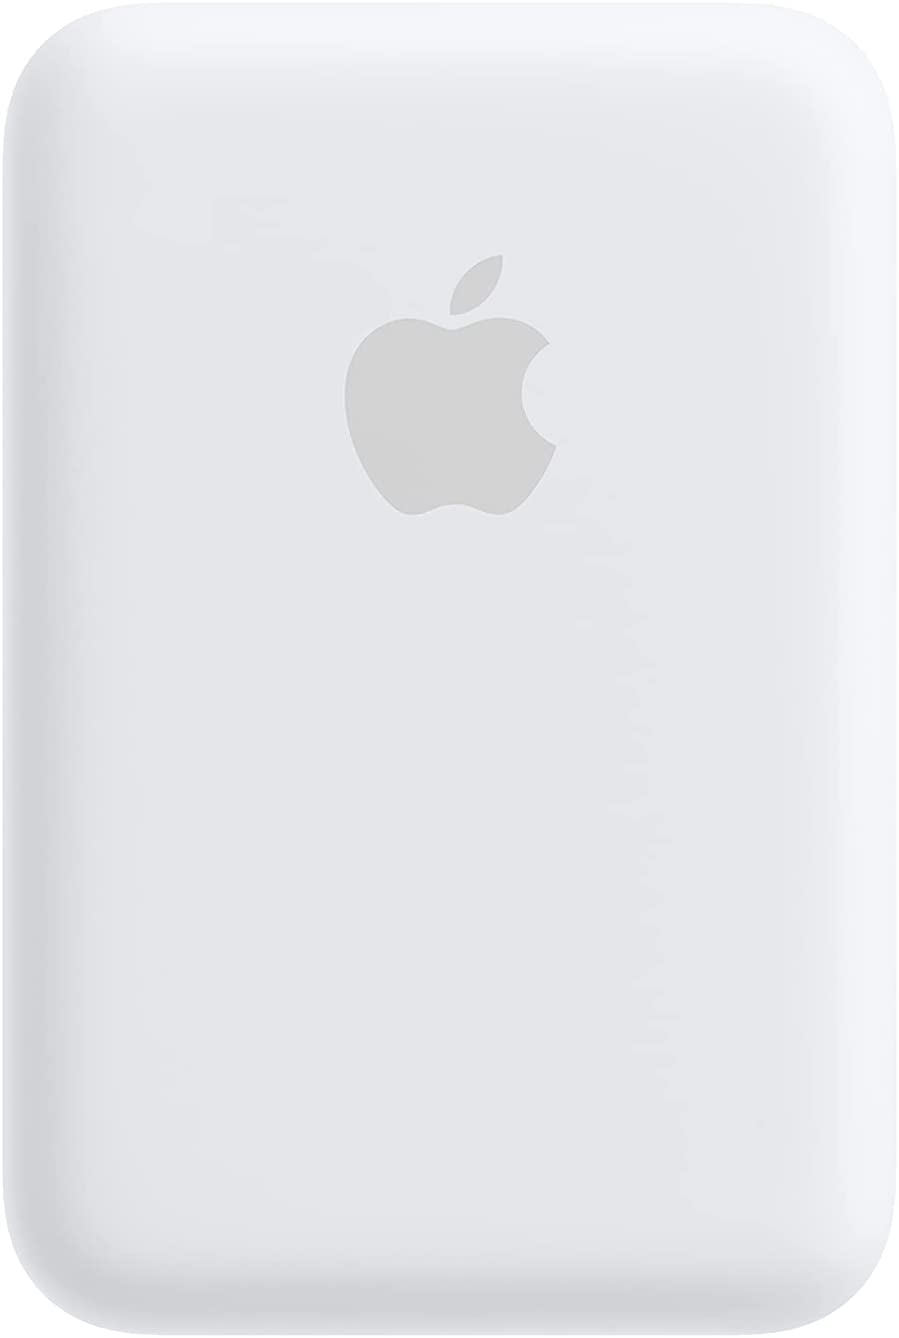 Apple MagSafe Battery Pack - White (New)